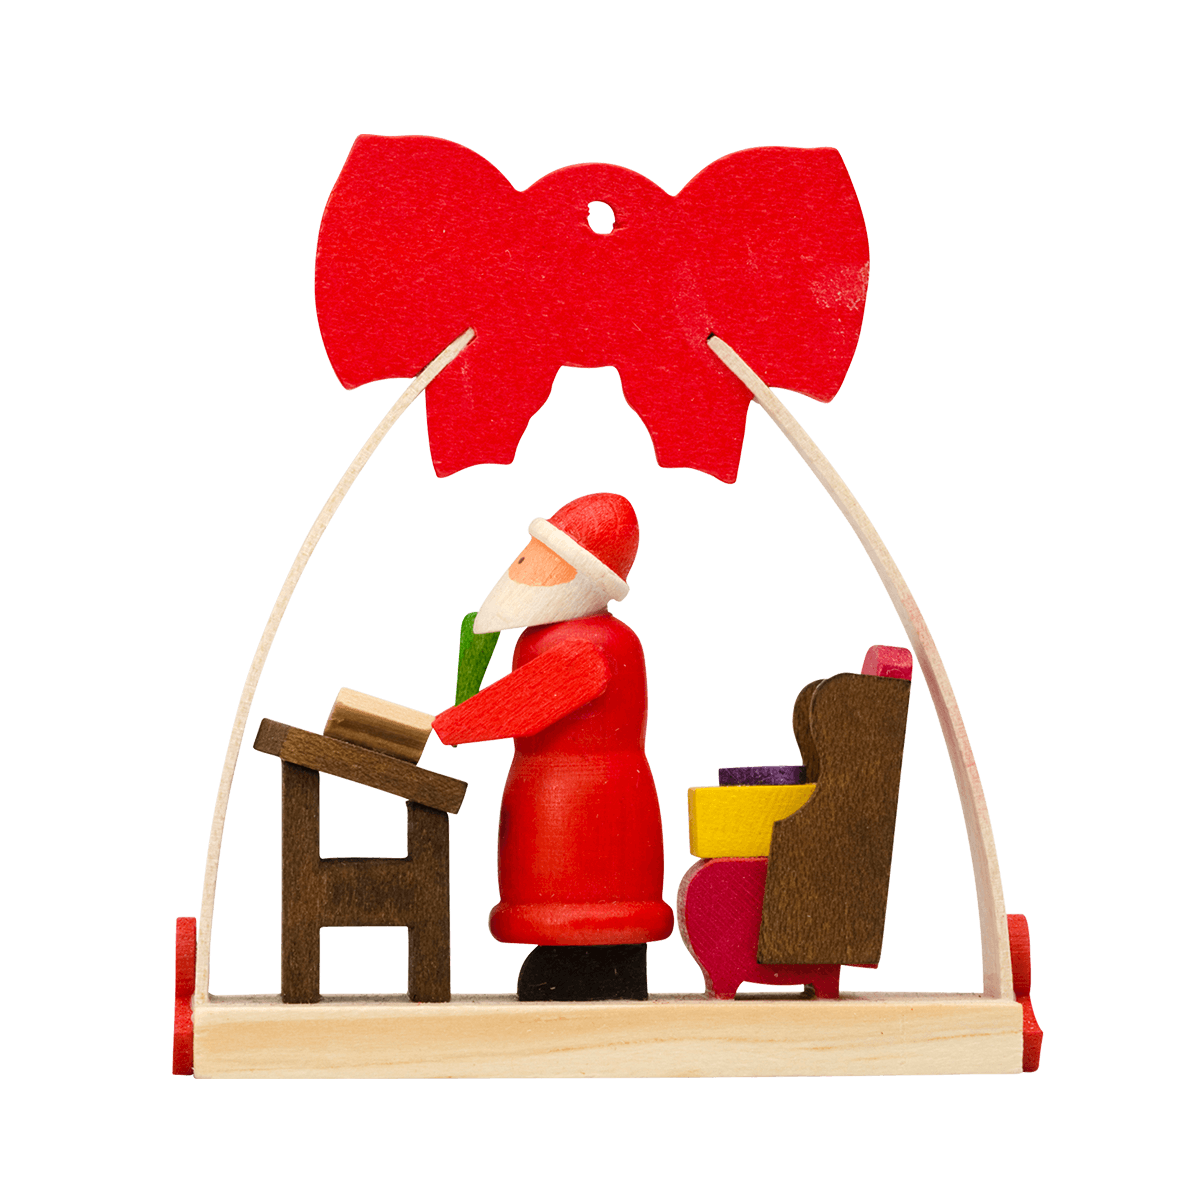 Arch with bow 'Santa Claus' Ornament - with wish list -